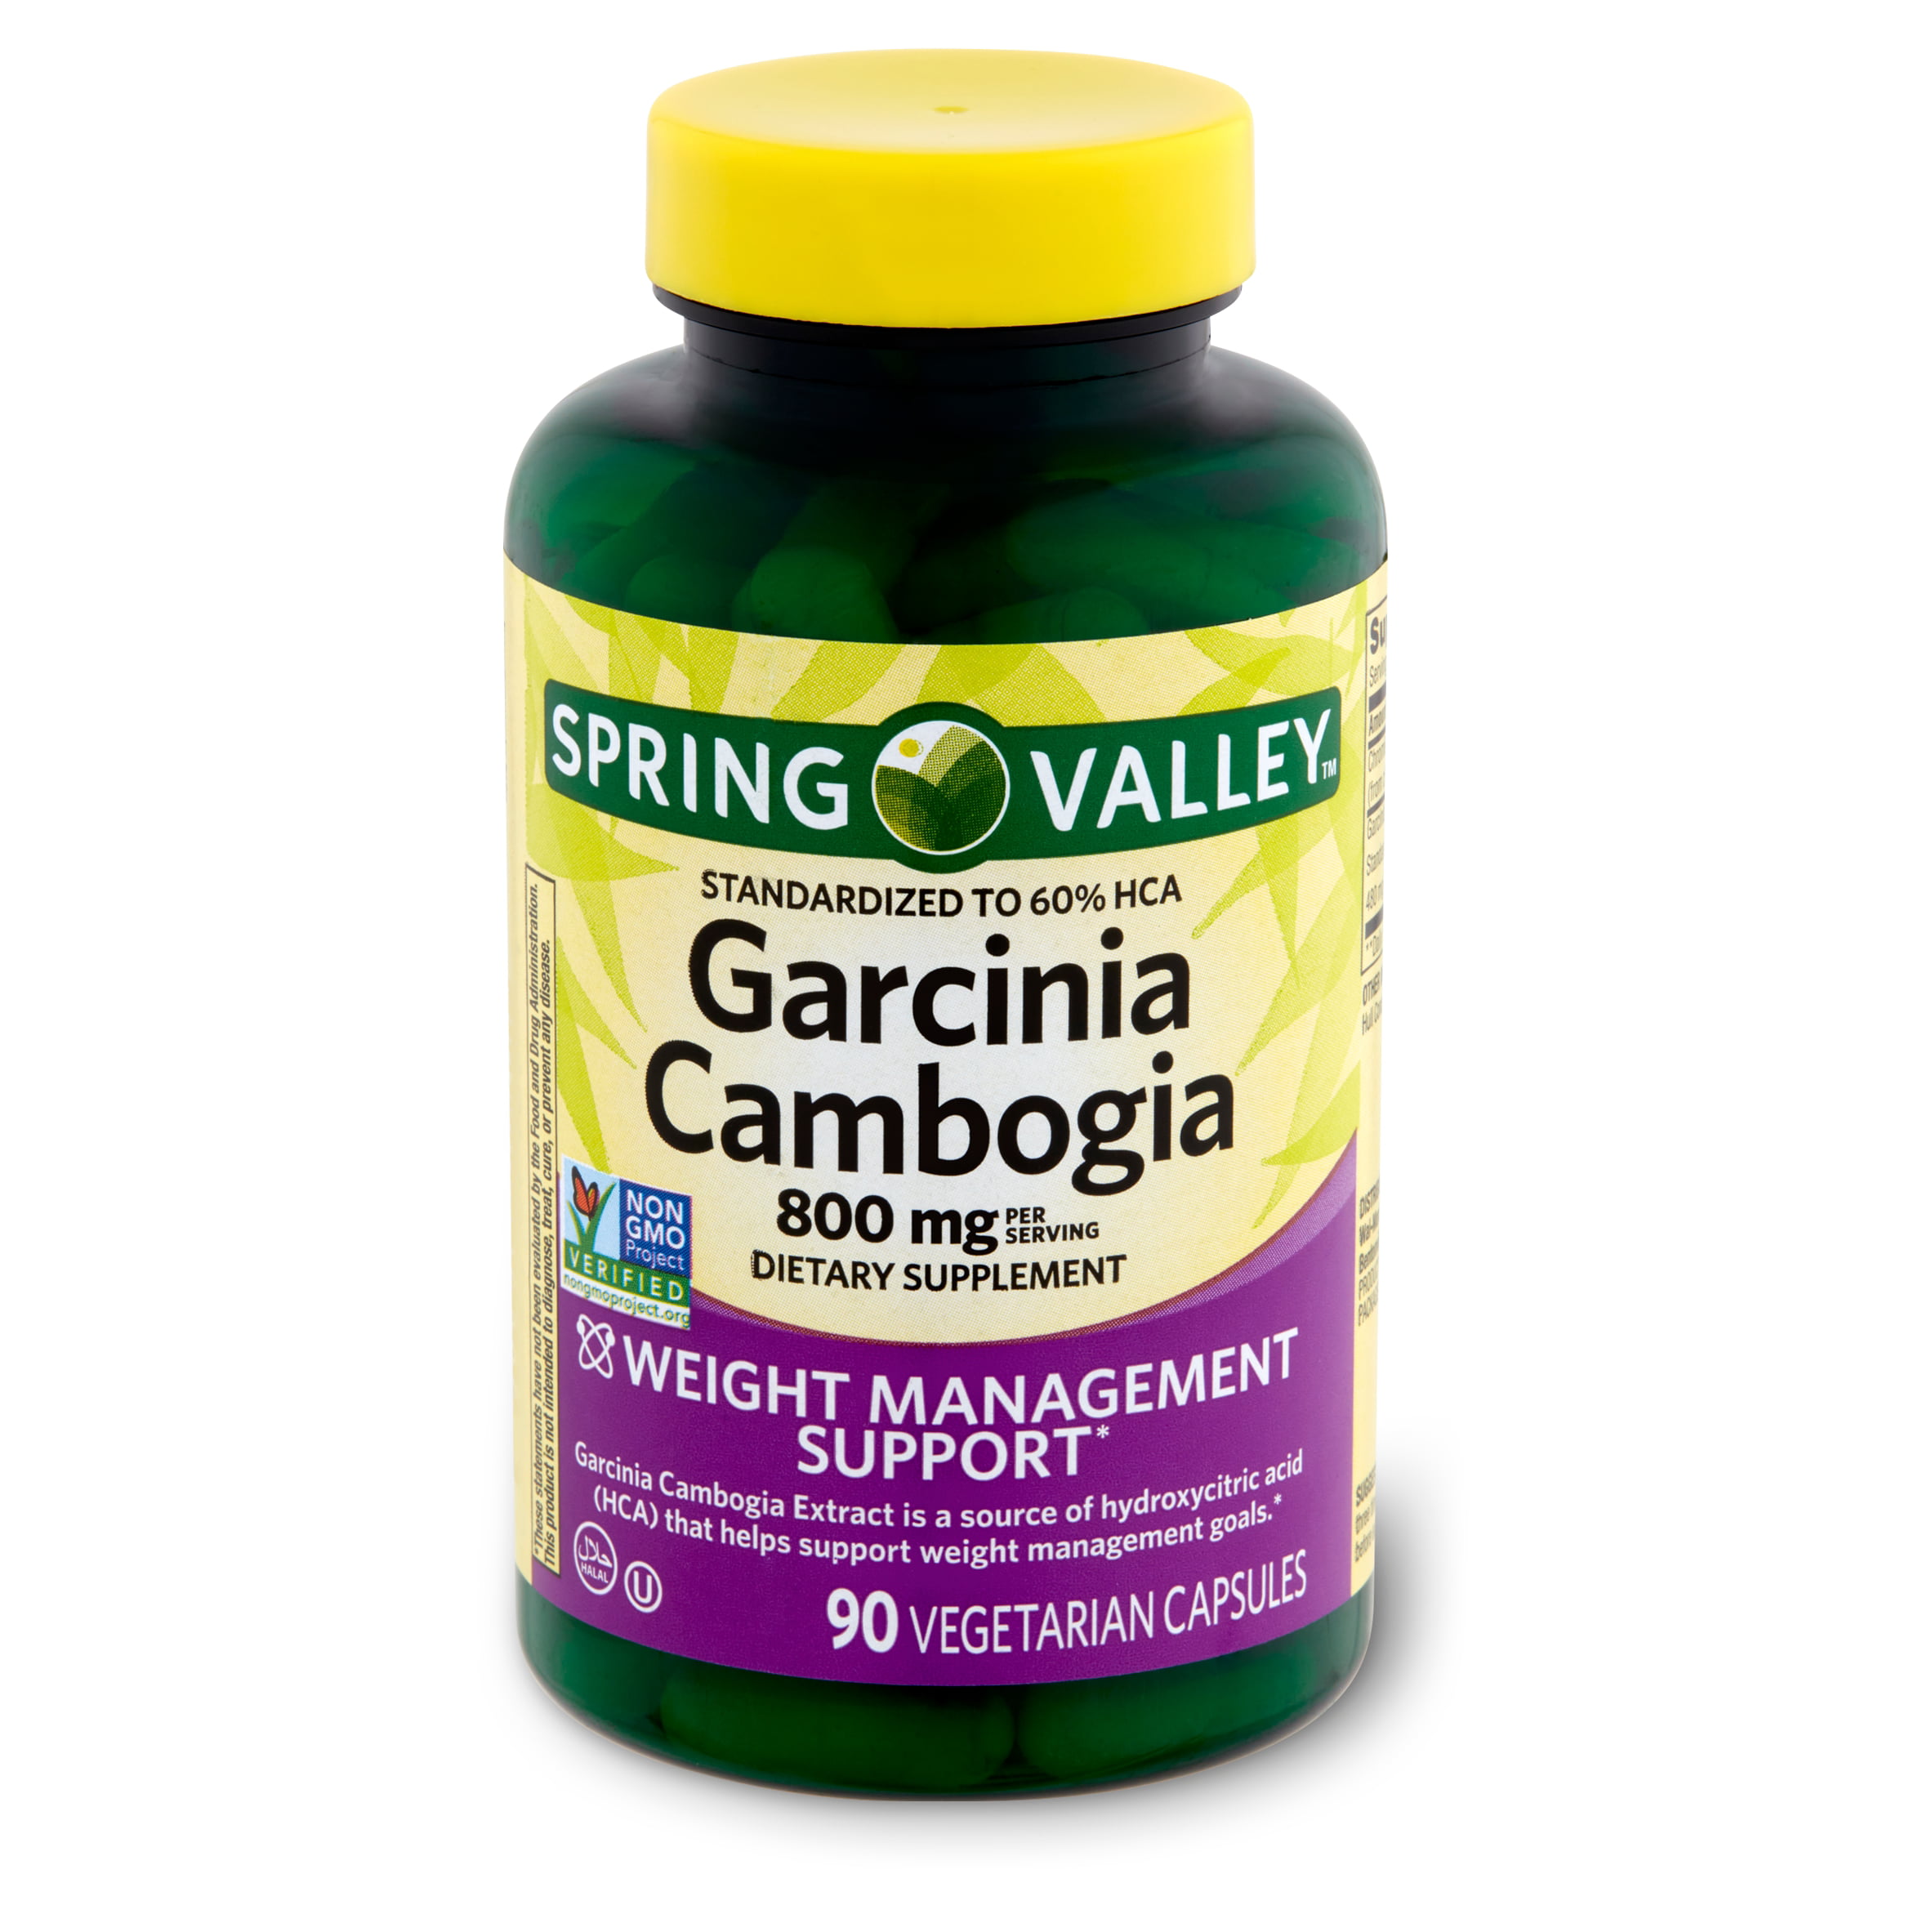 Spring Valley Garcinia Cambogia Dietary Supplement, 800 mg, 90 count